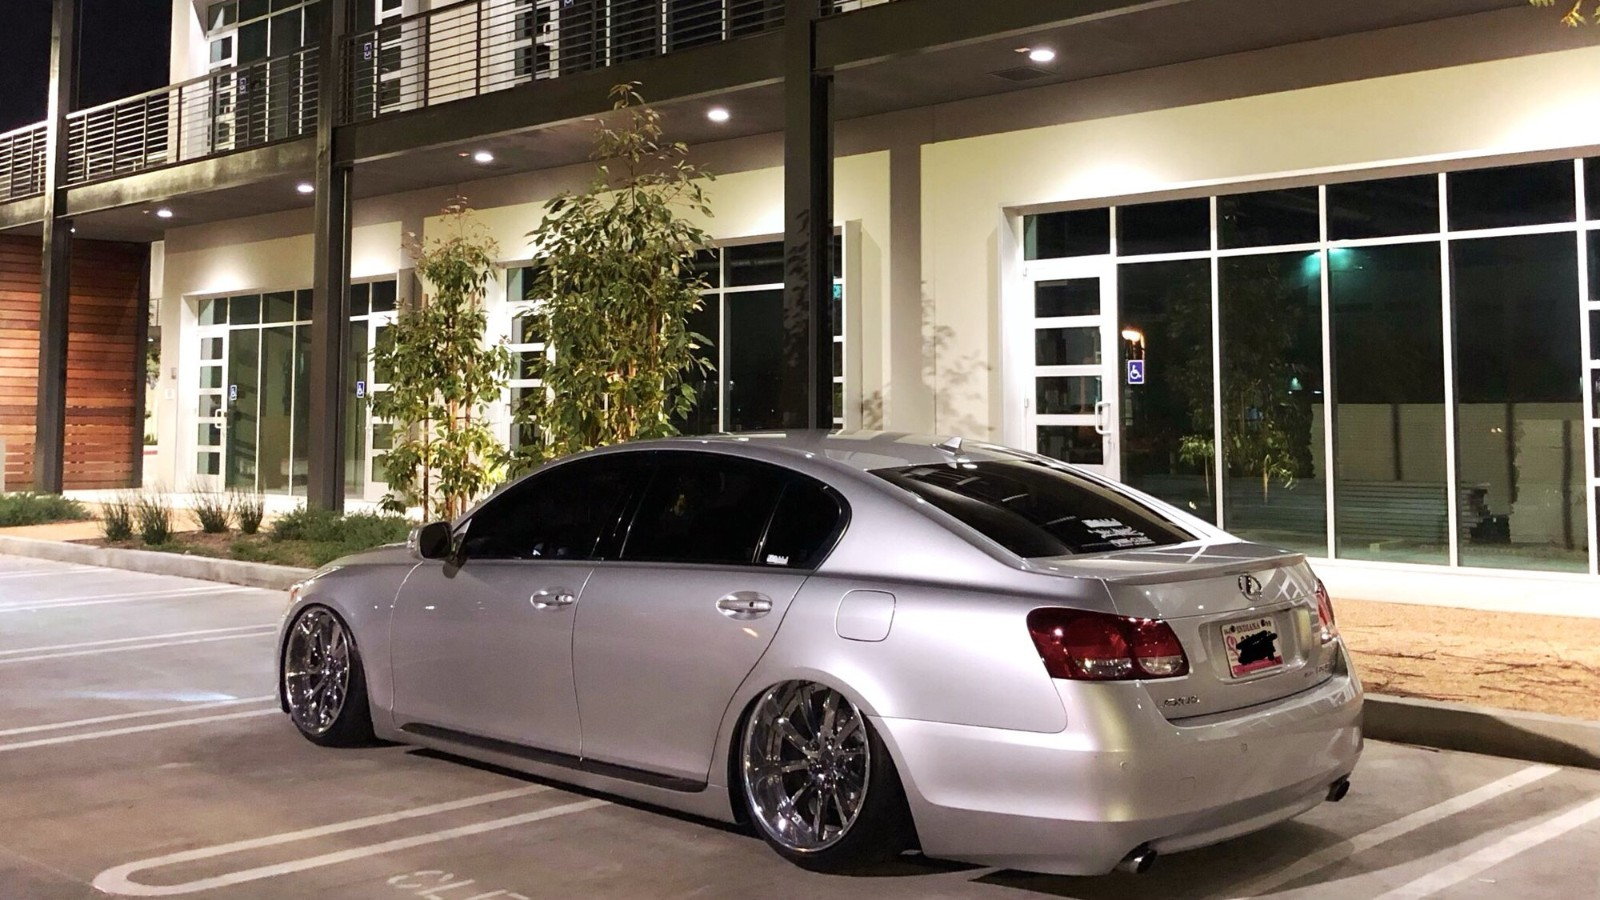 08 Gs 350 Is One Bad Bagged Build Clublexus